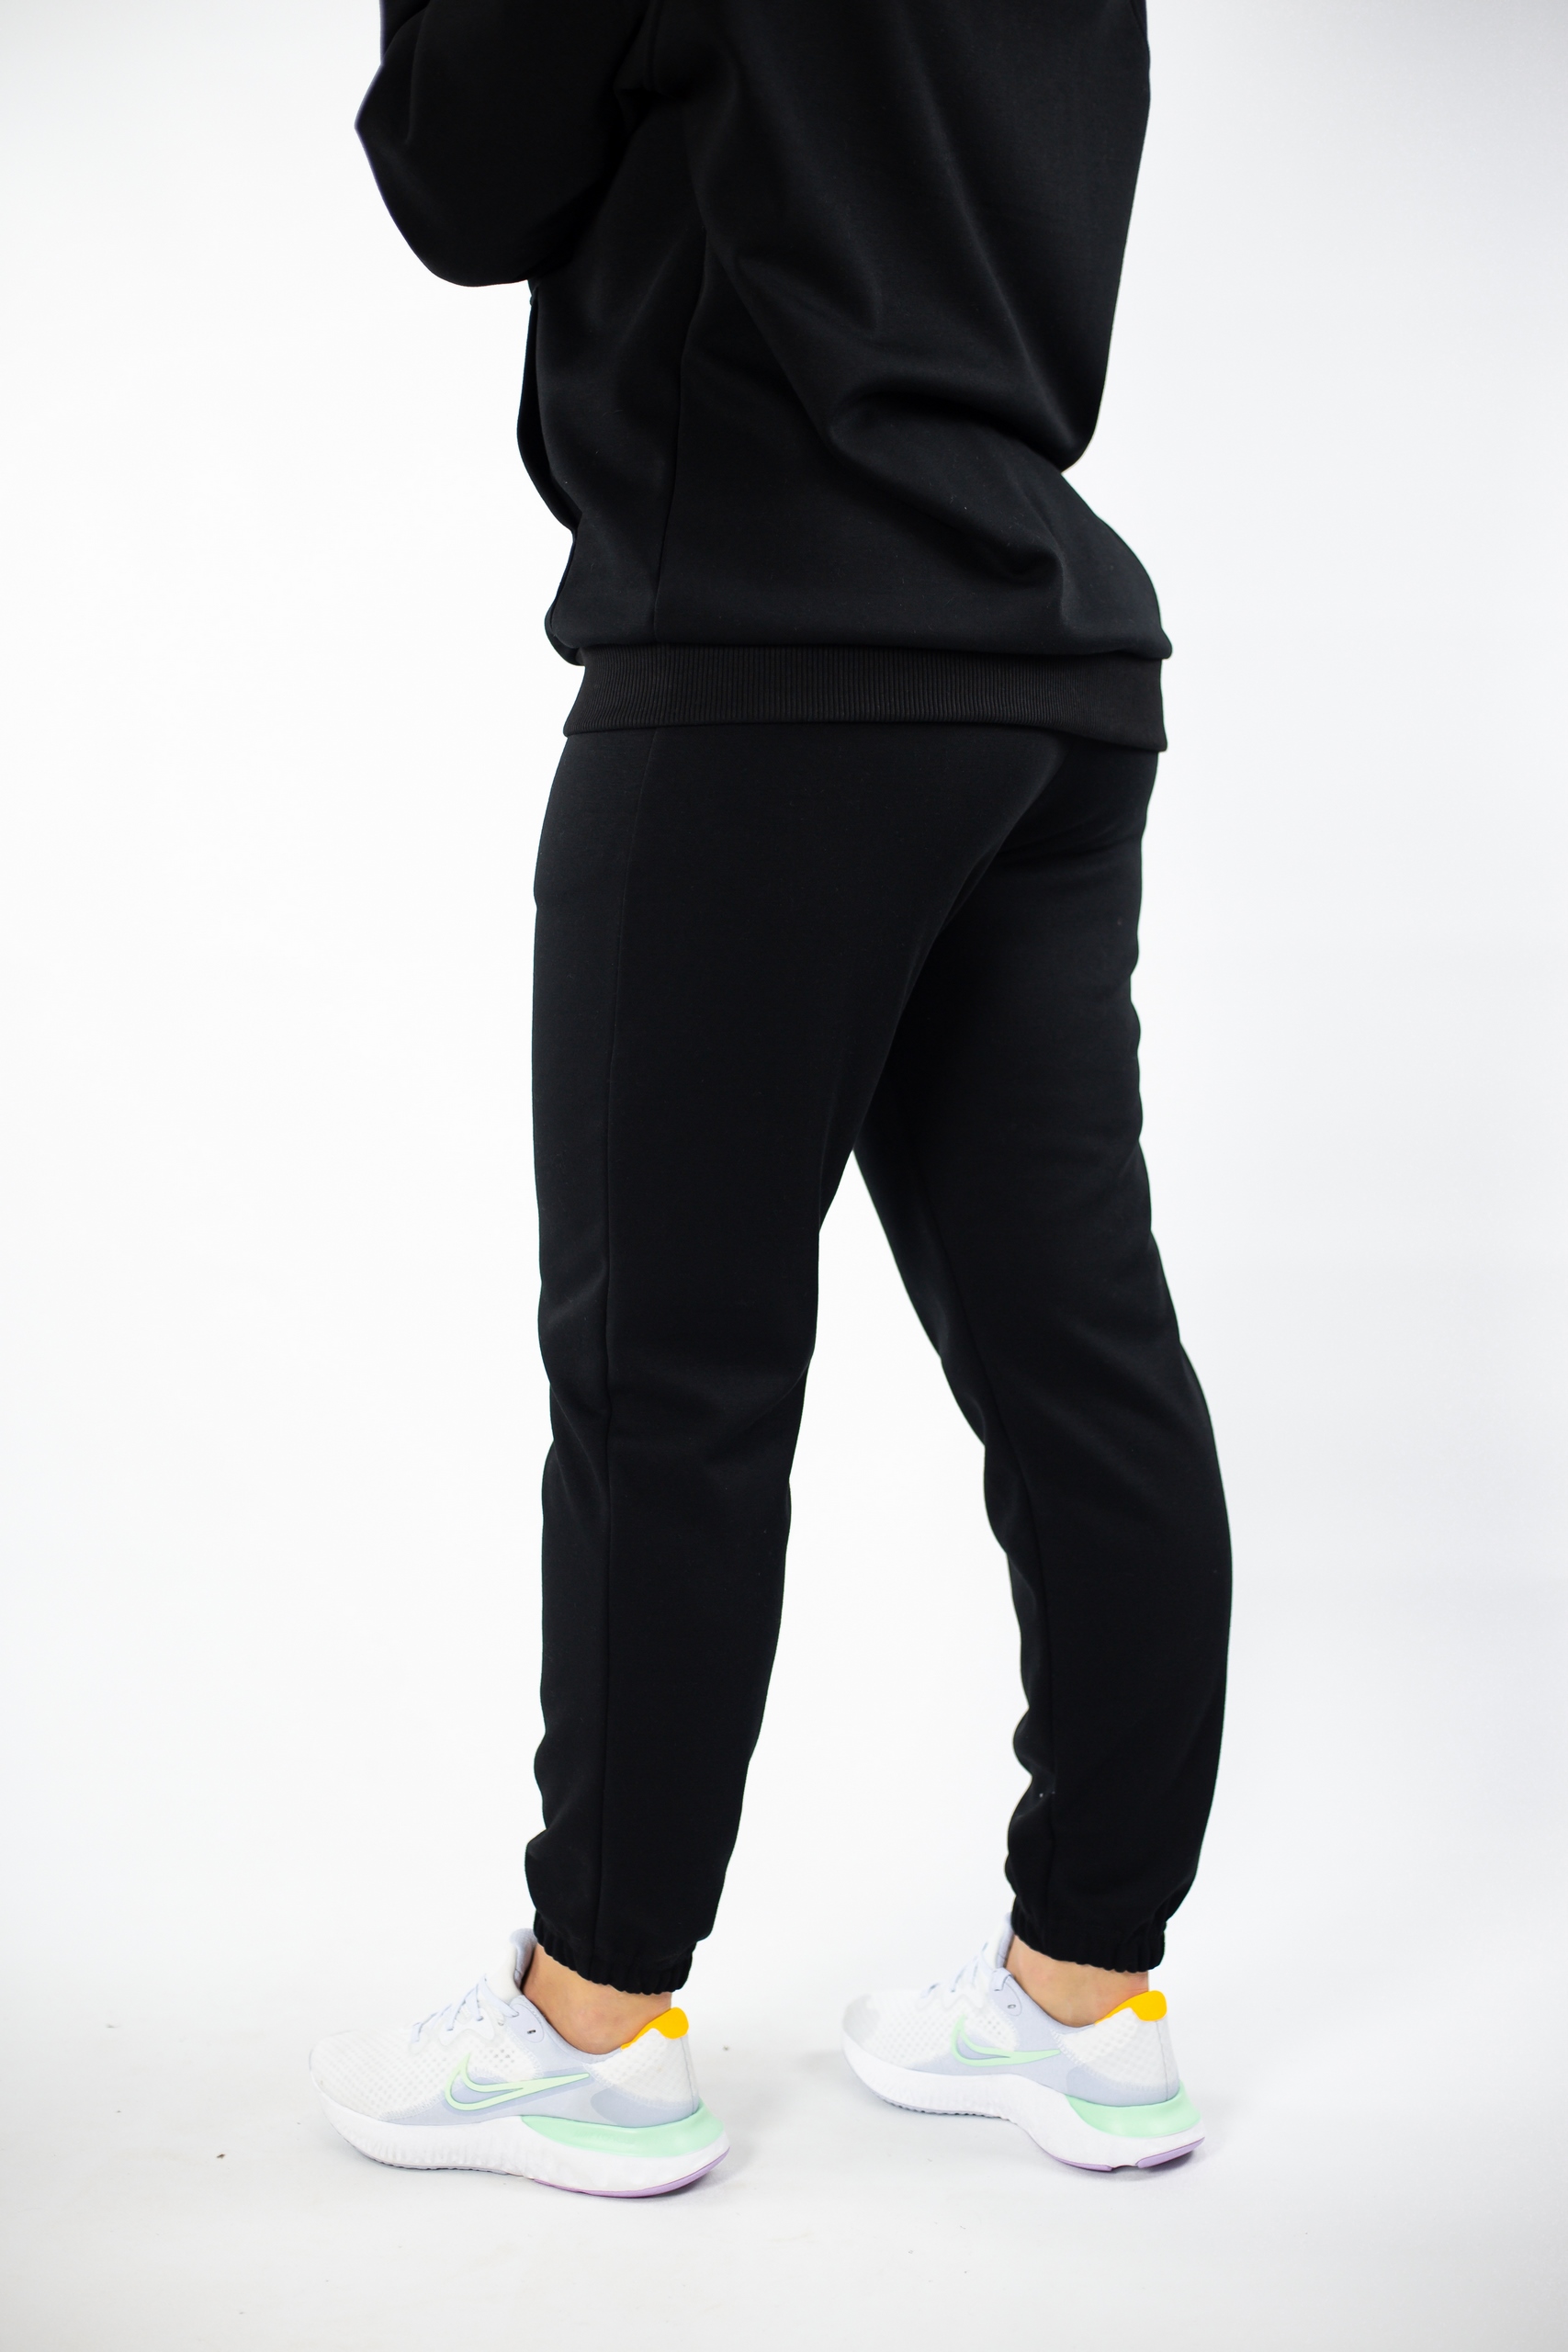 Women's warm pants joggers with fur